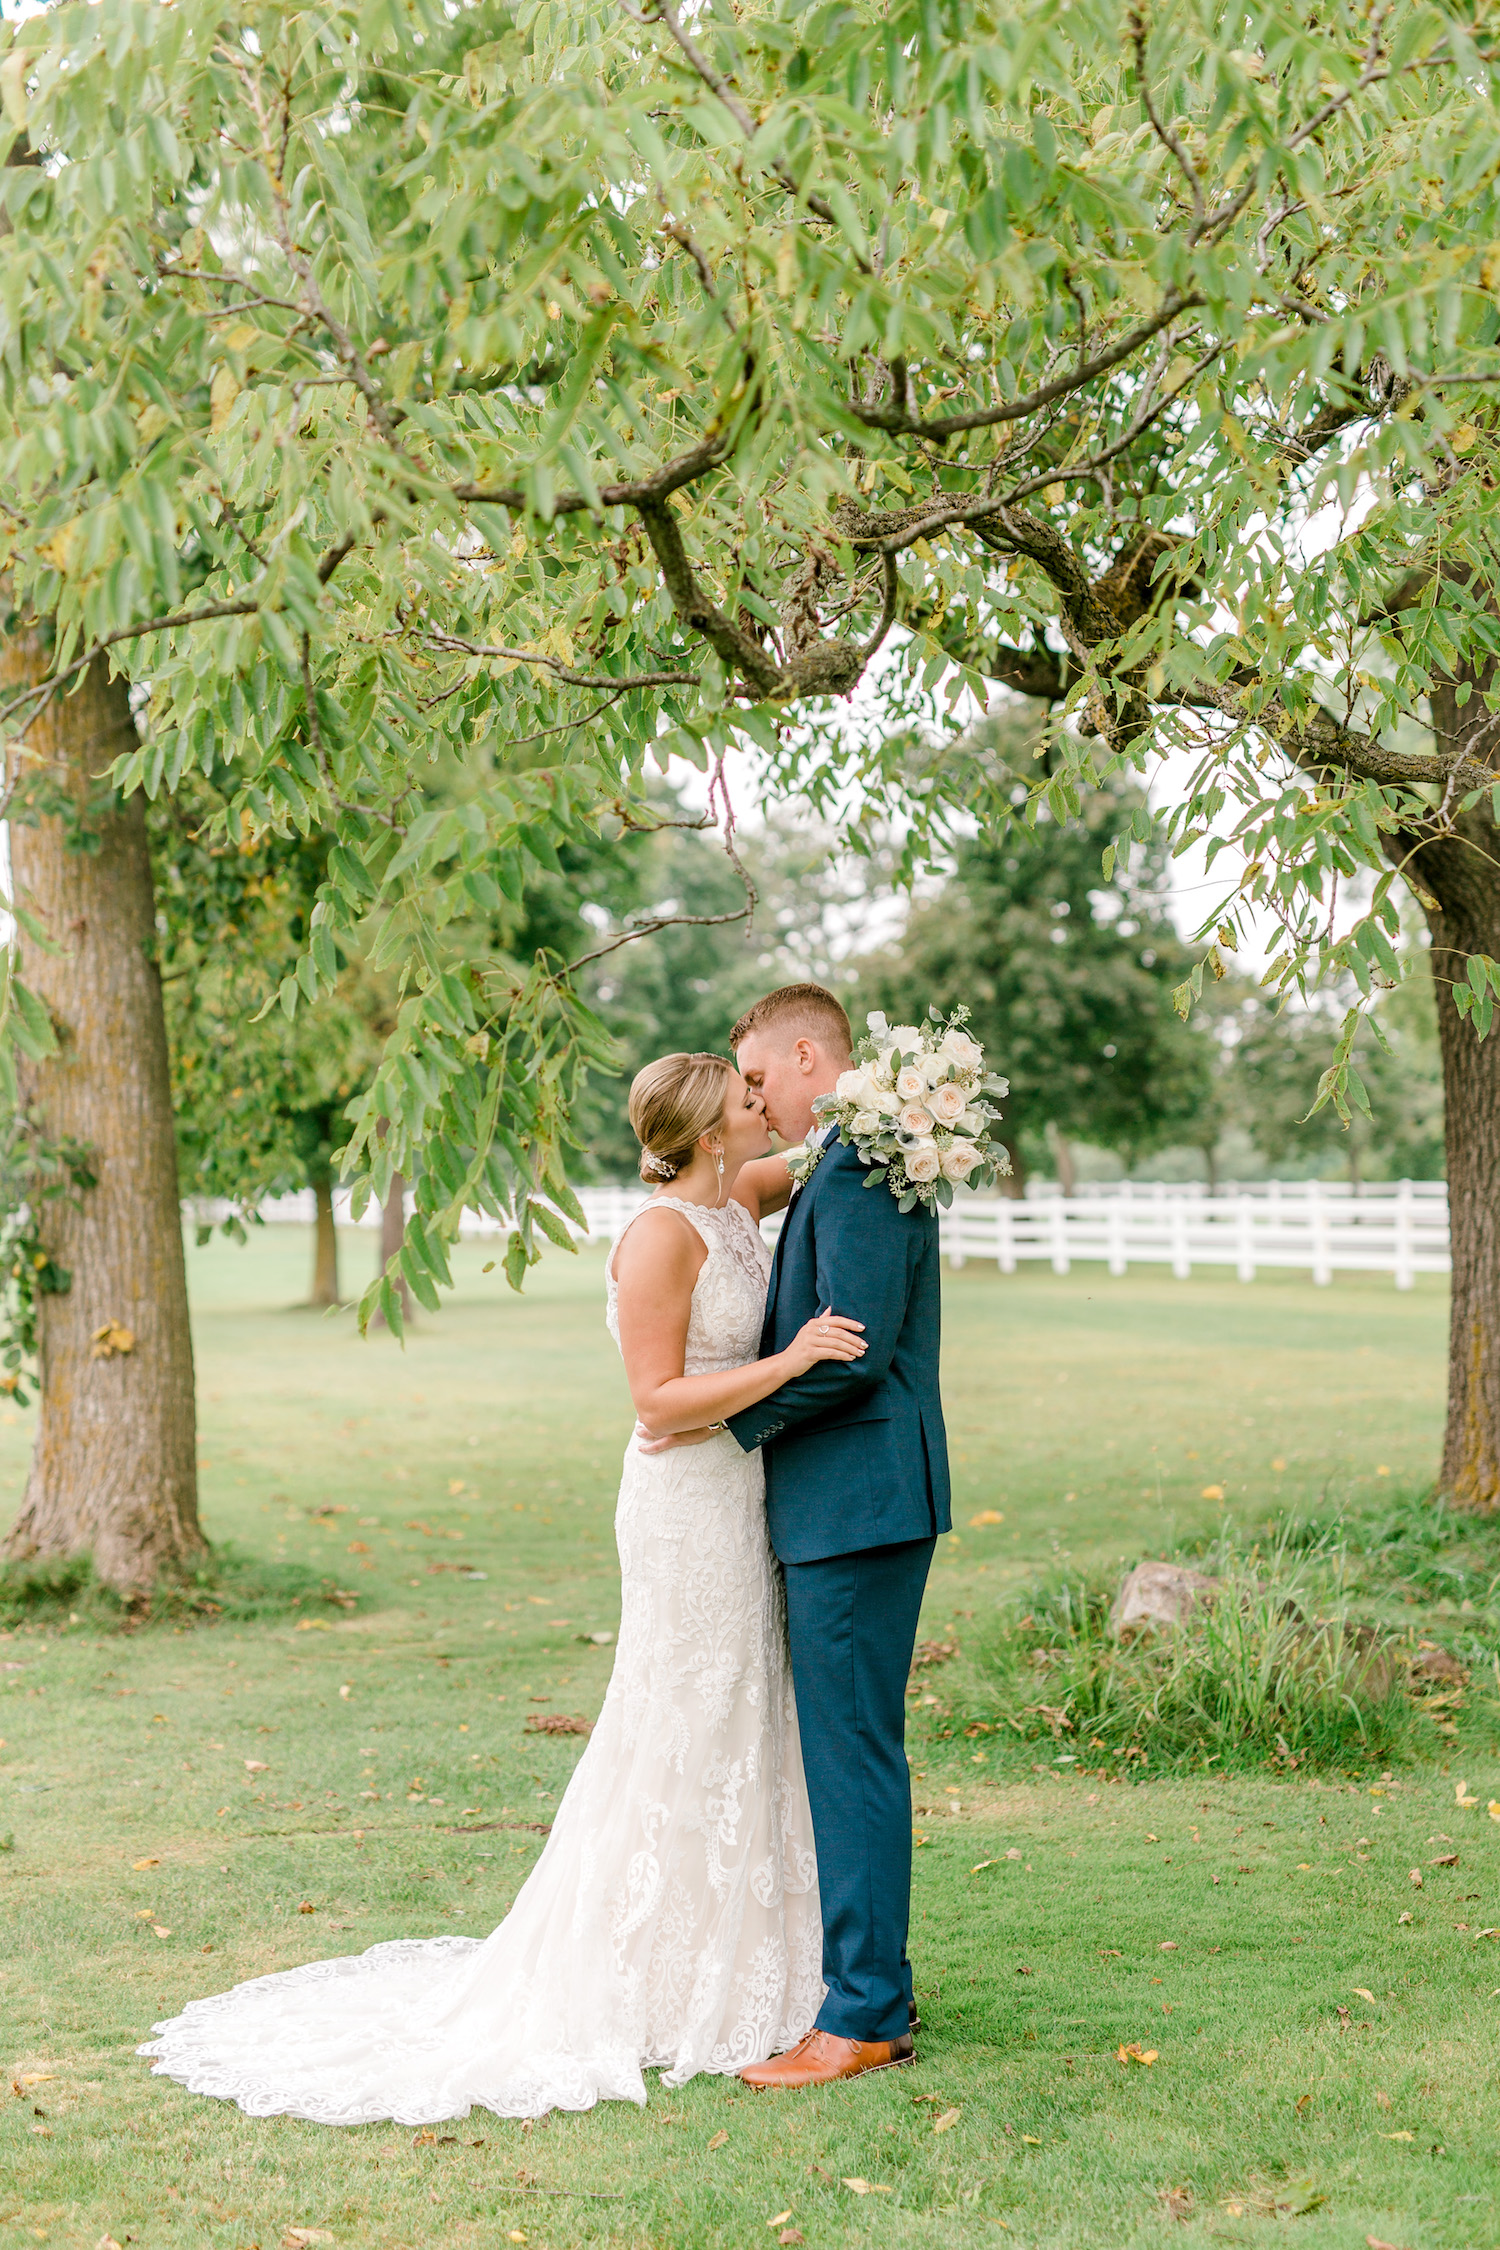 Bride and Groom kissing under tree